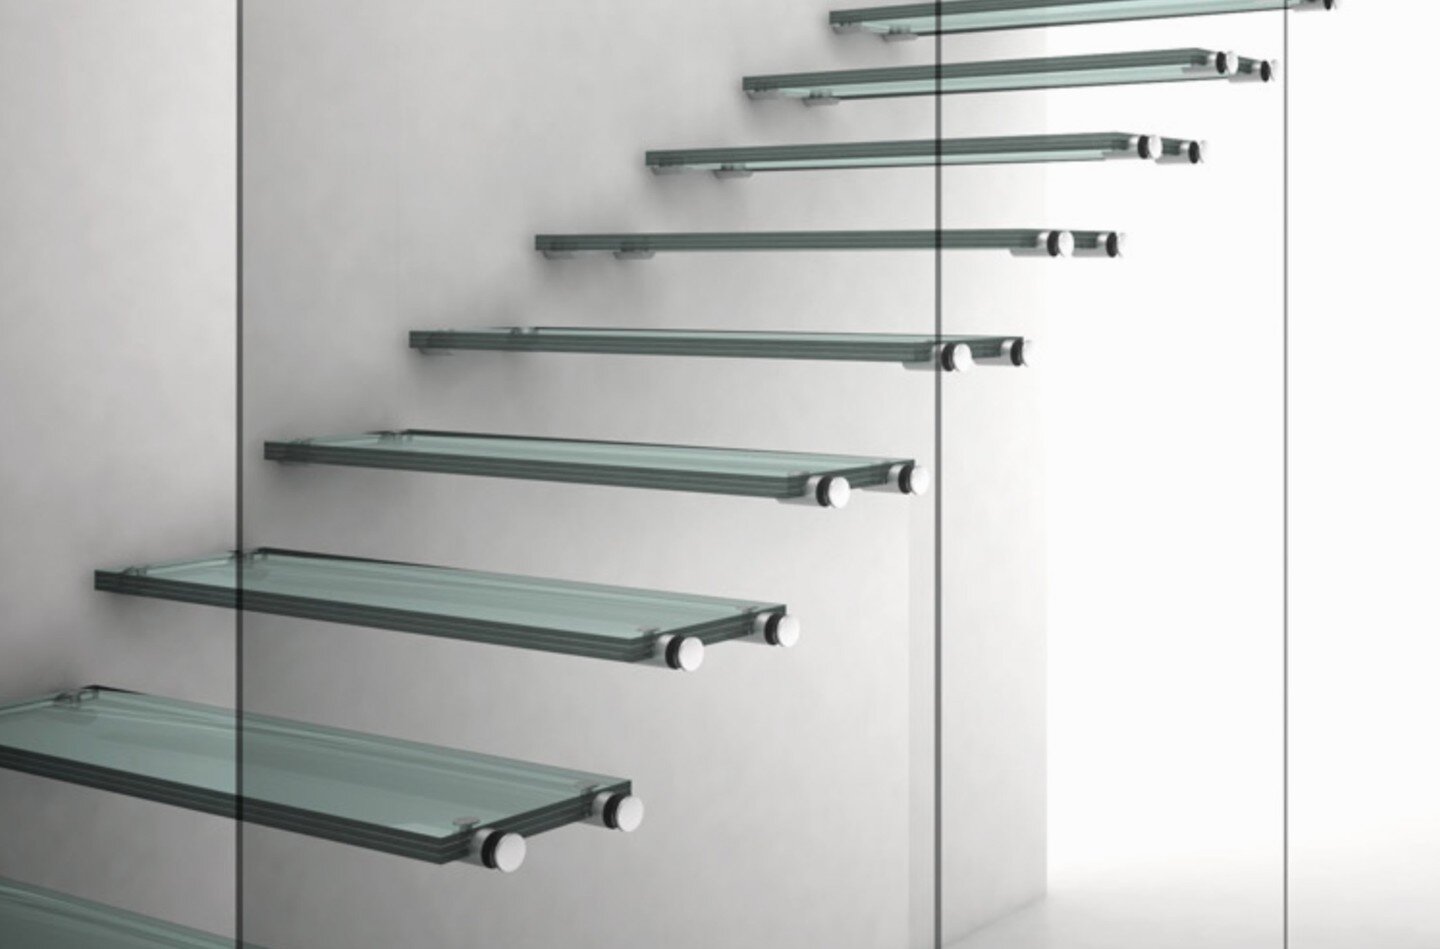 Glasstep signature transparent system adds a modern touch without taking away from the surrounding architecture. 

#glass #glassstairs #floatingsteps #architecture #construction #glassdesign #staircase #stairsystem #moderndesign #modernstairs